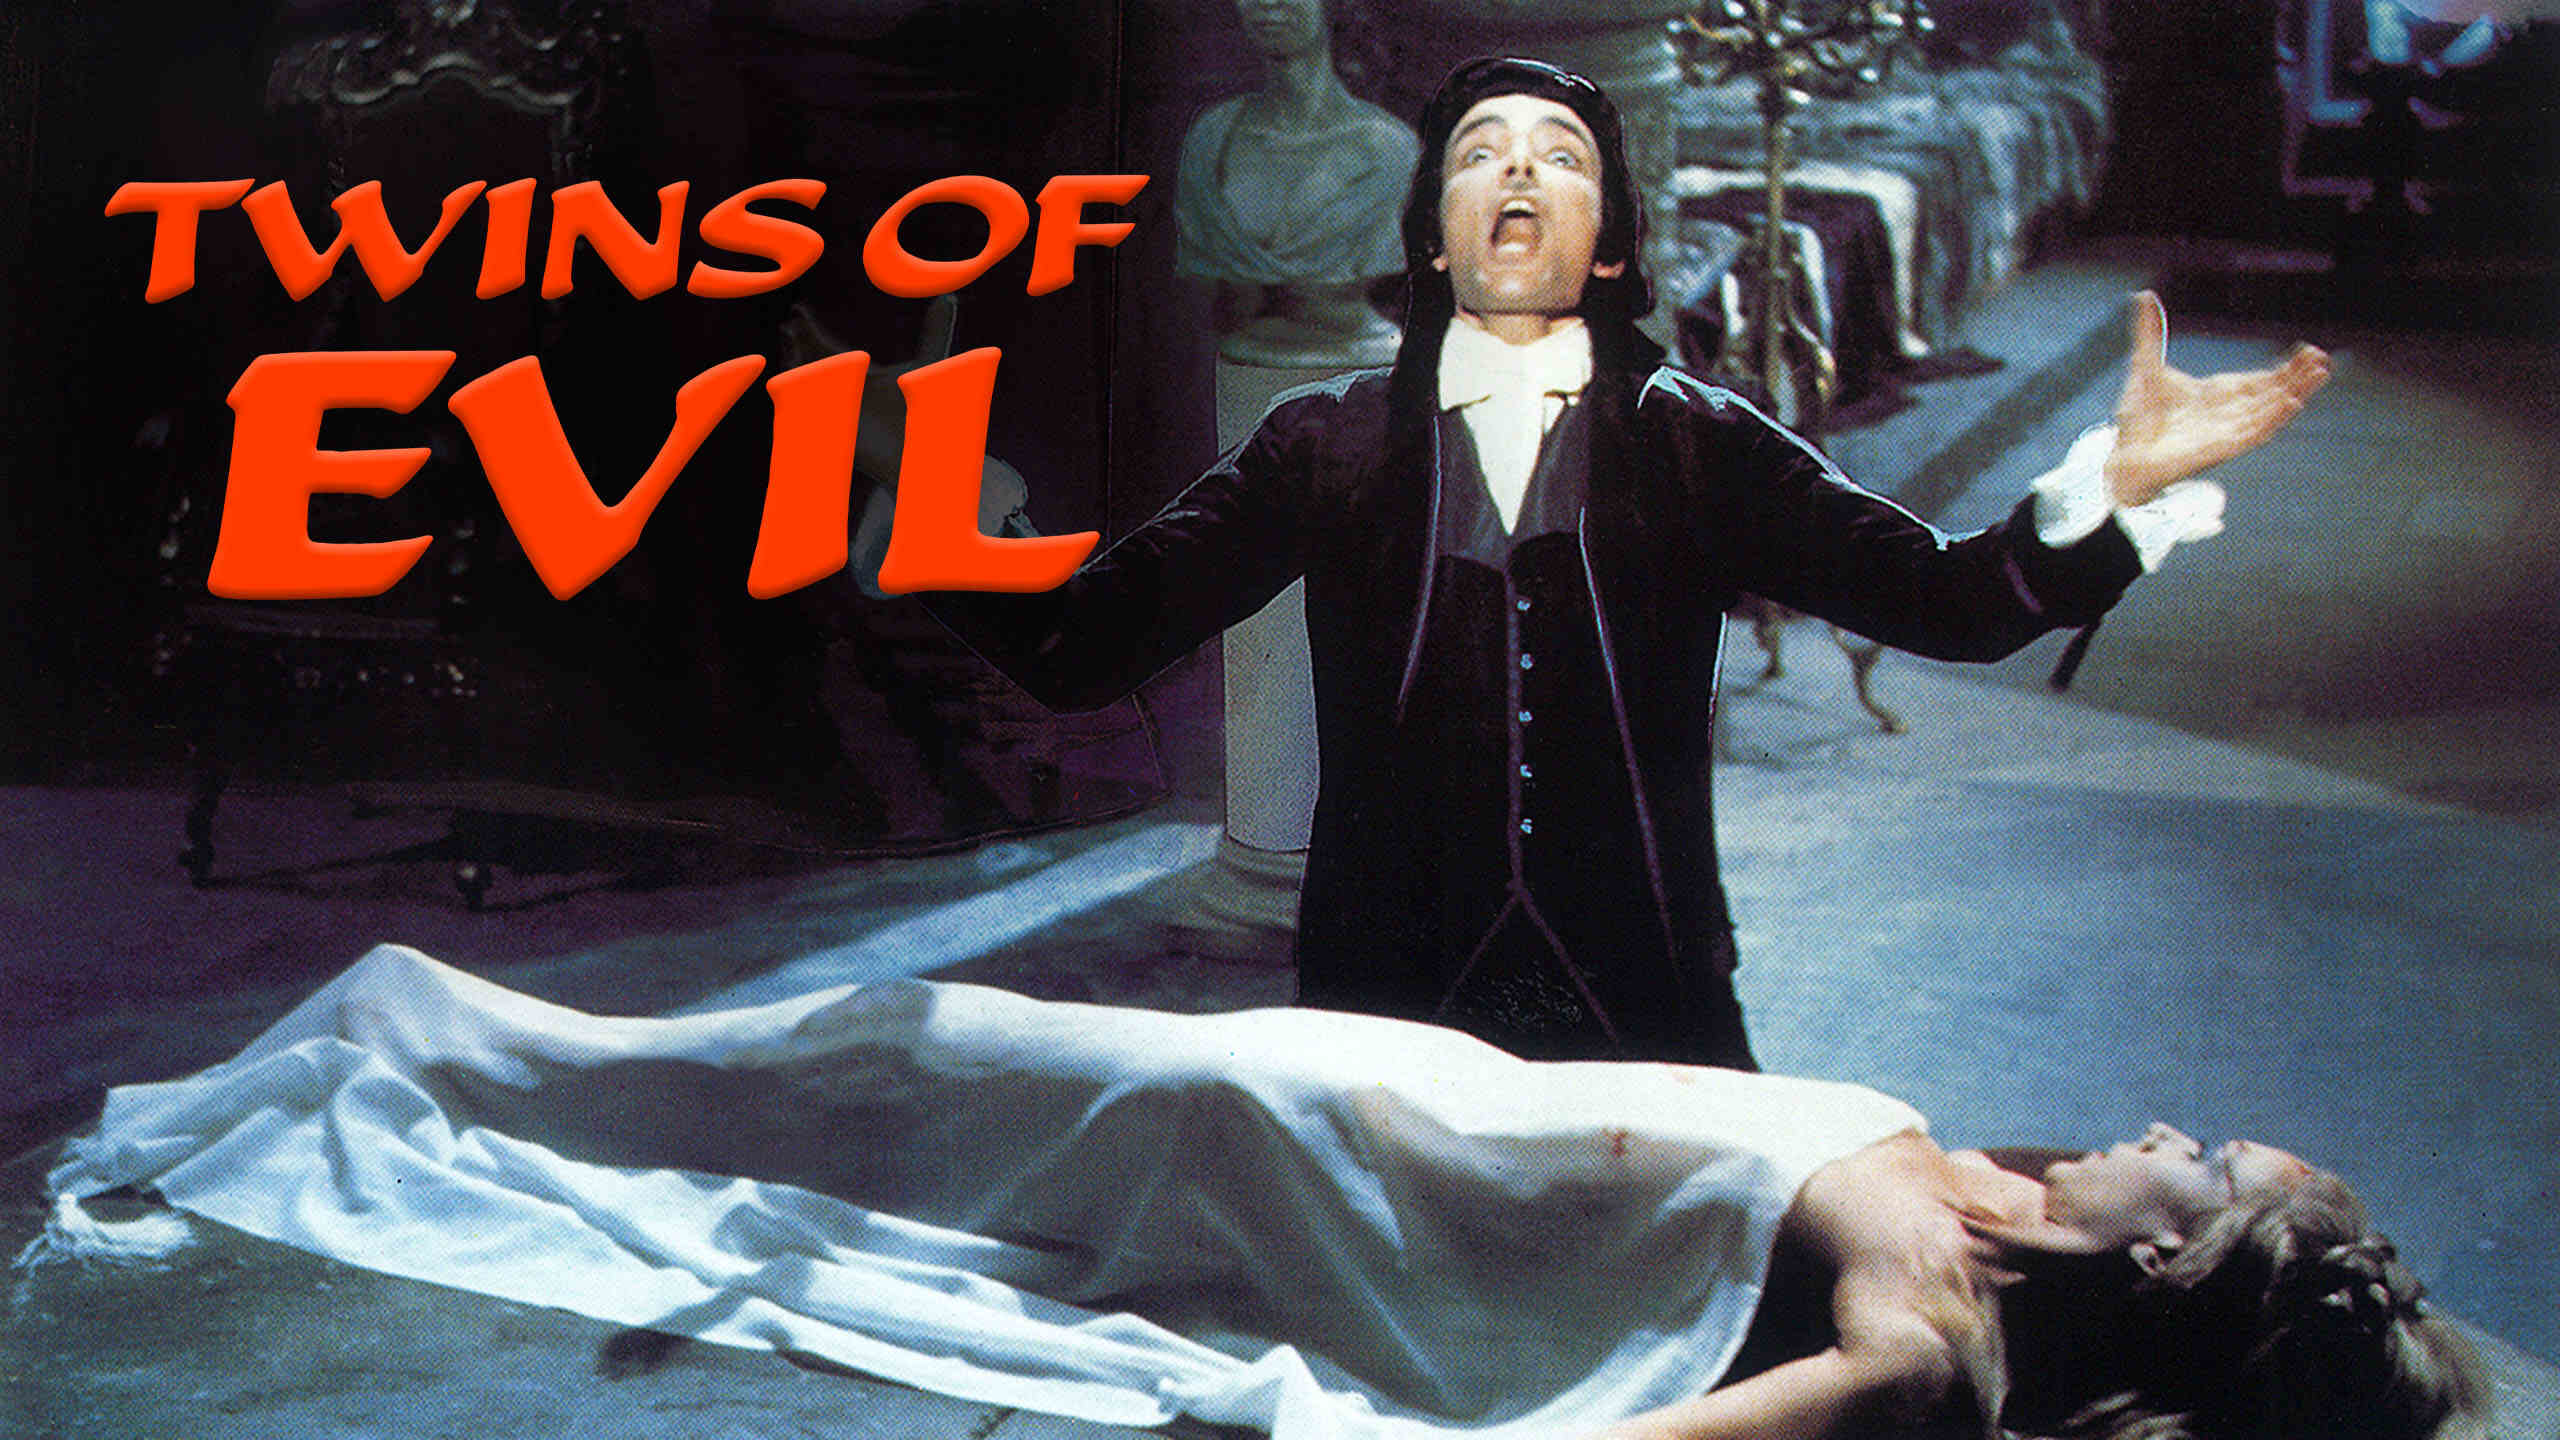 38-facts-about-the-movie-twins-of-evil